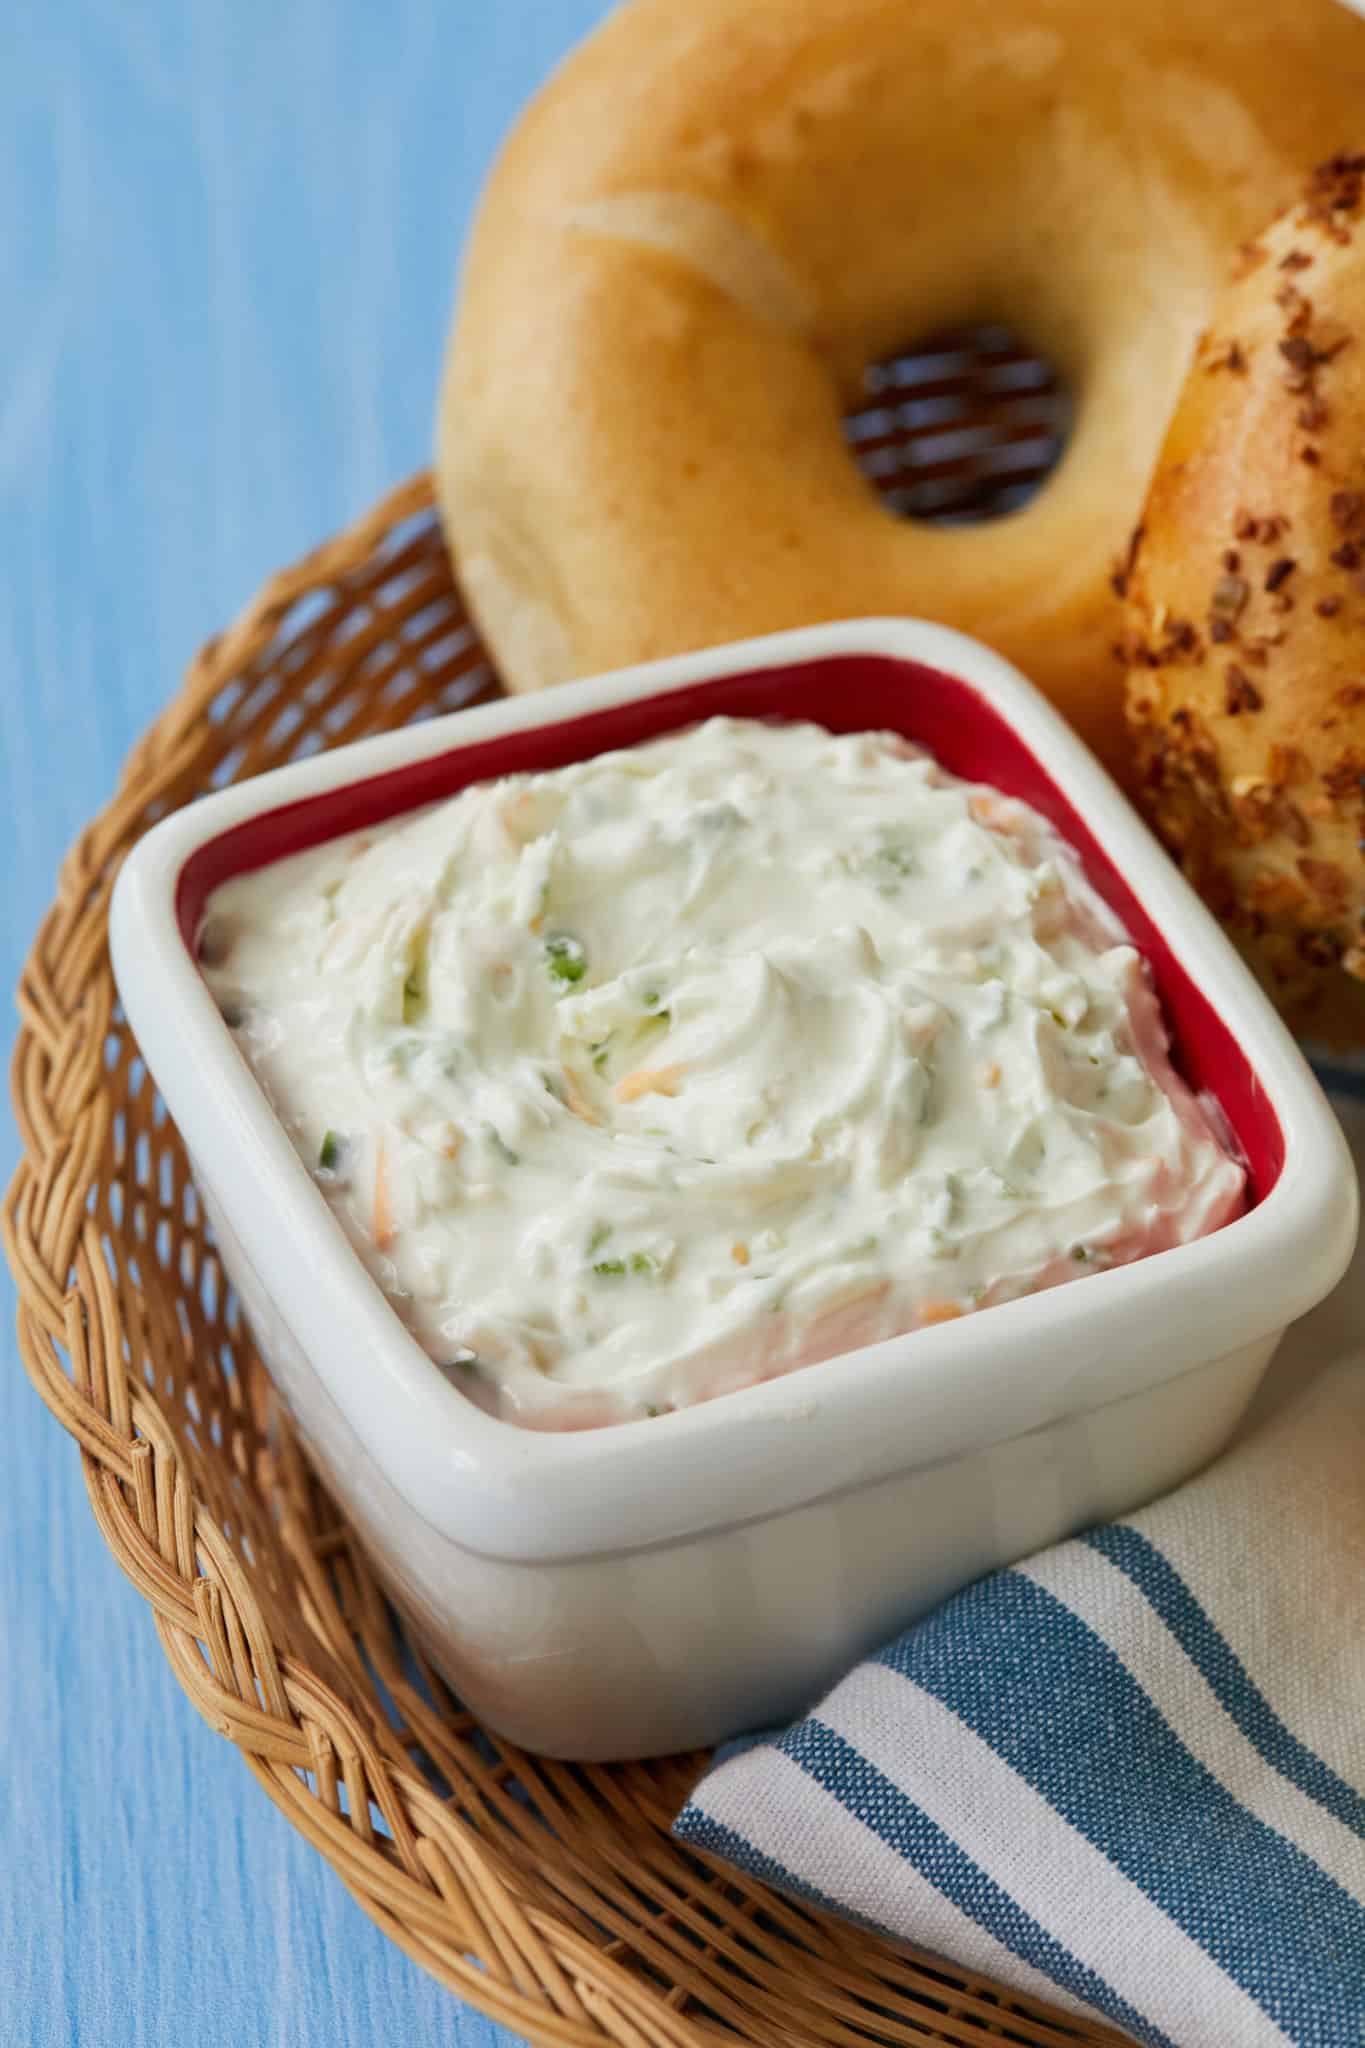 A square white bowl is filled with homemade jalapeno cheddar cream cheese. The cream cheese is whipped with fresh jalapenos. Next to the cream cheese are two bagels: one plain bagle and one everything bagel.